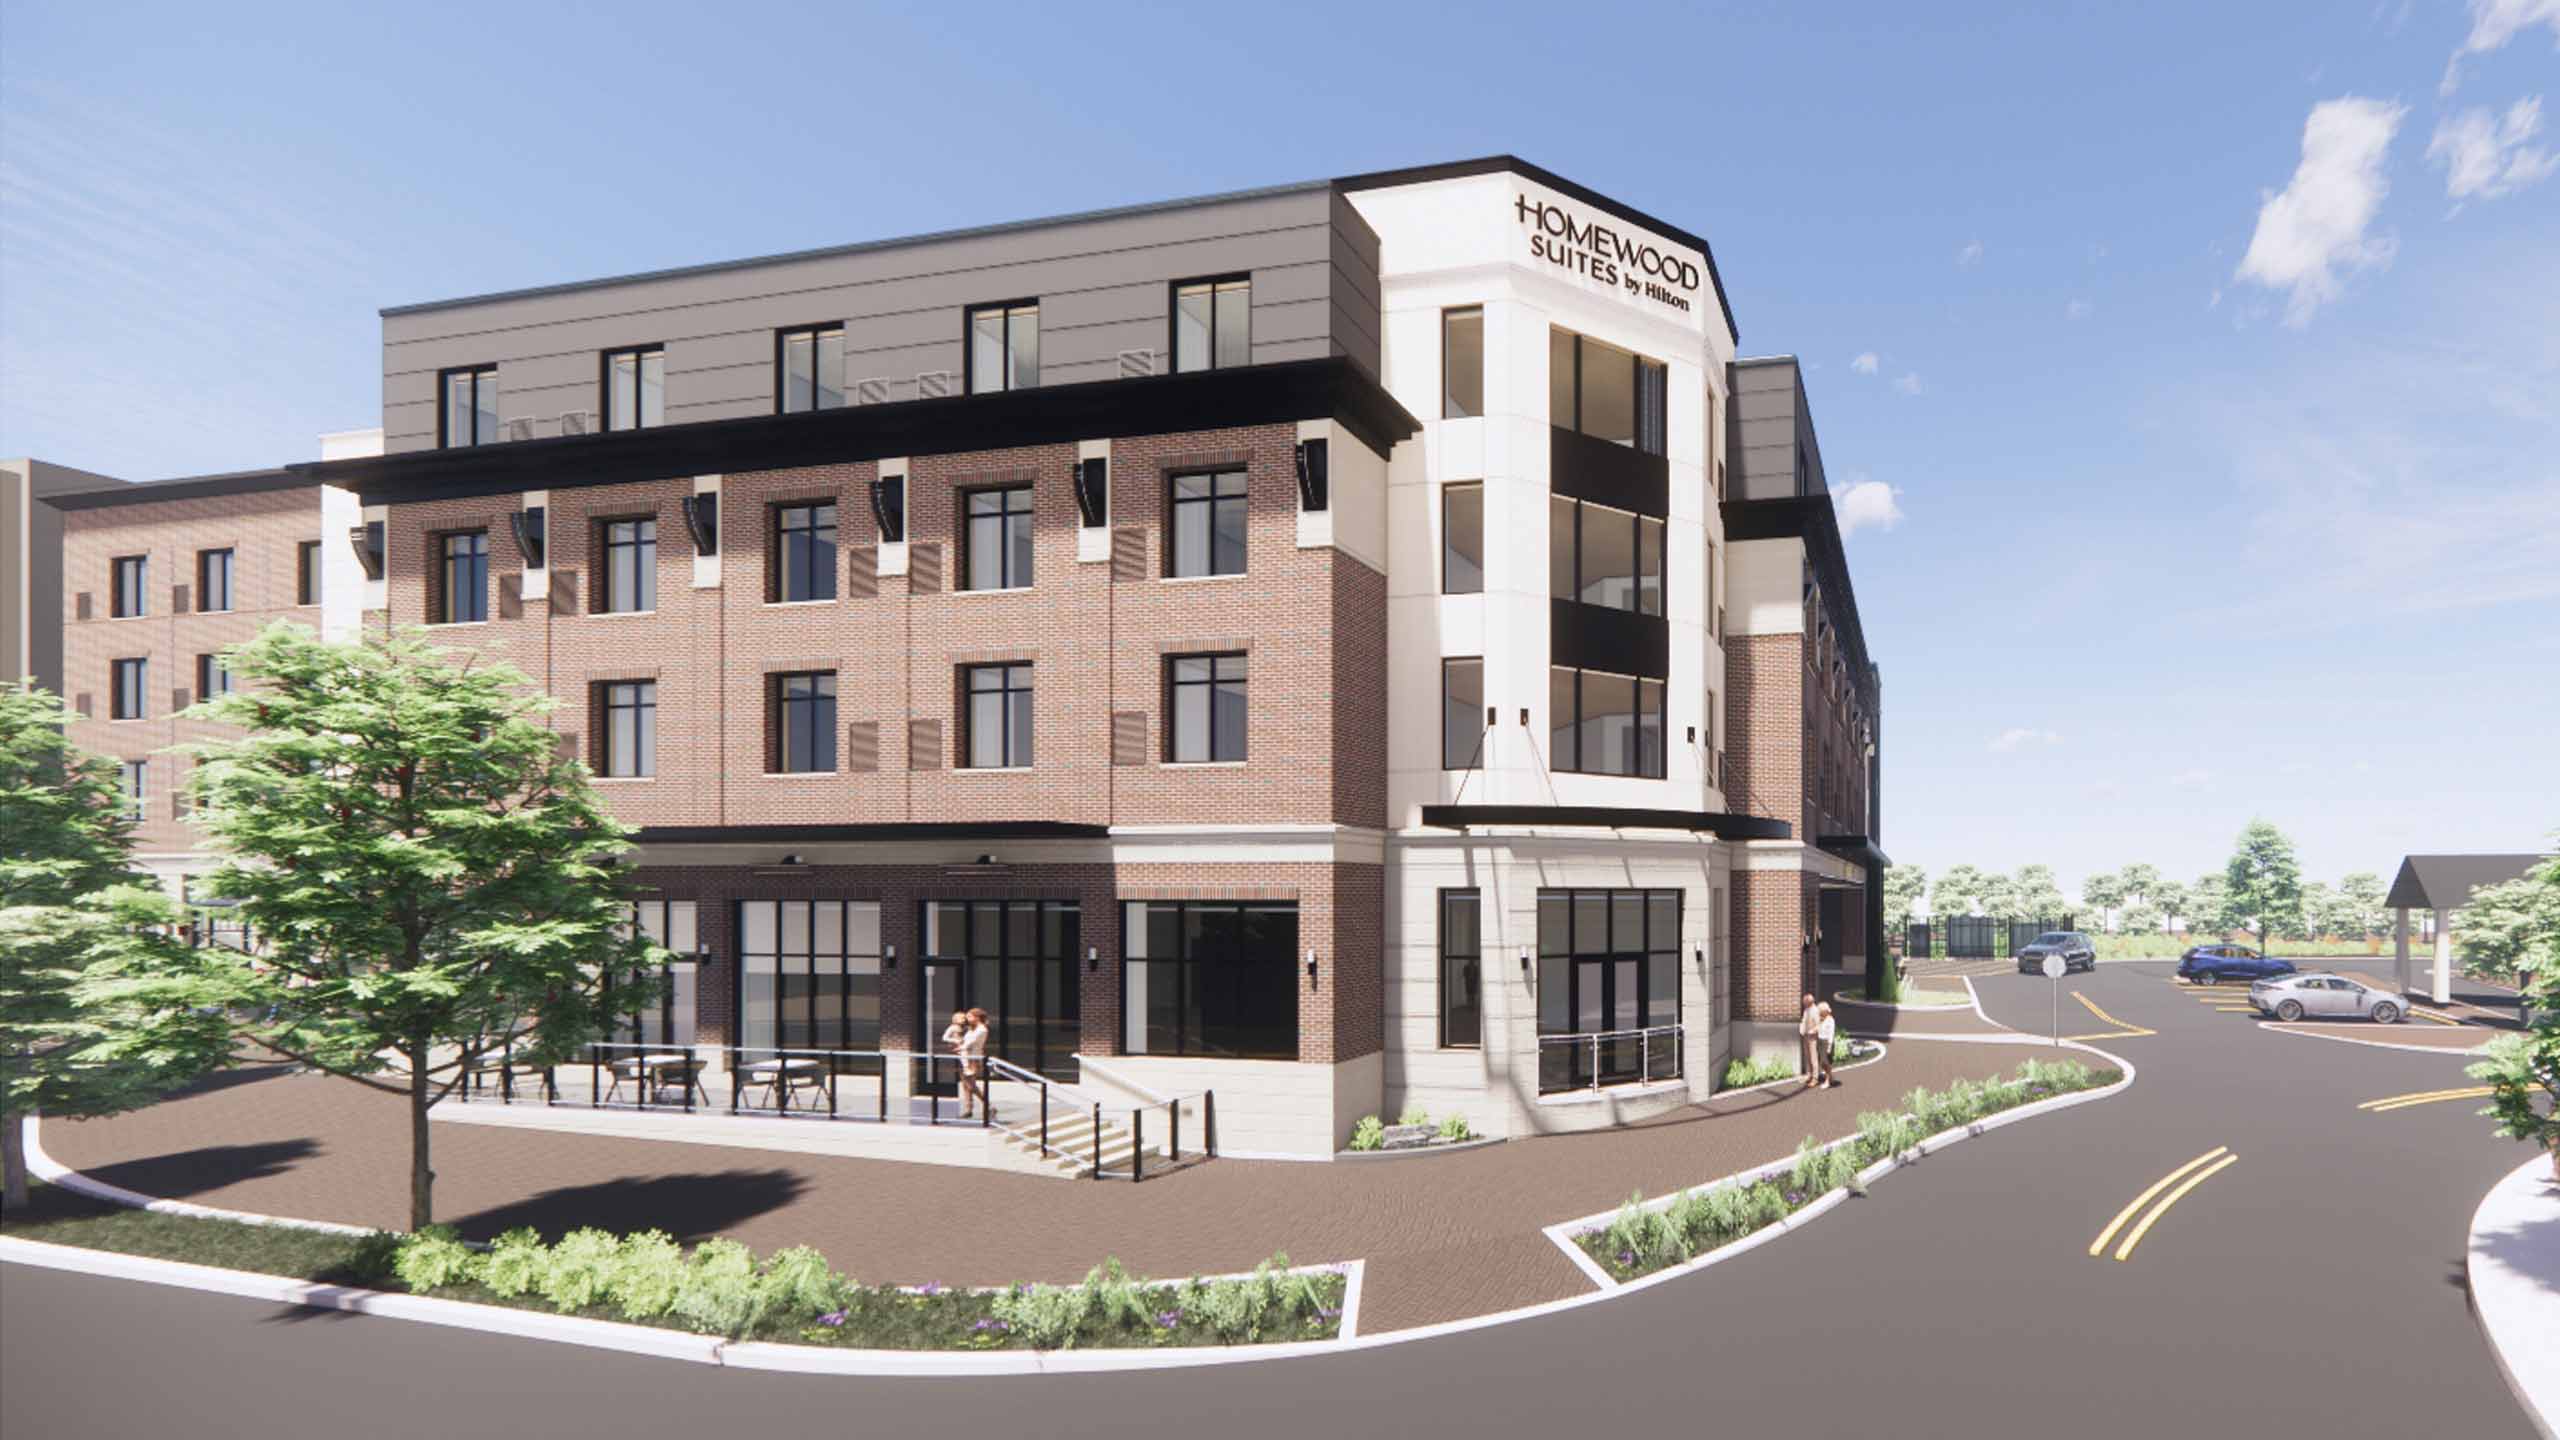 Homewood Suites by Hilton at Foundry Place Featured